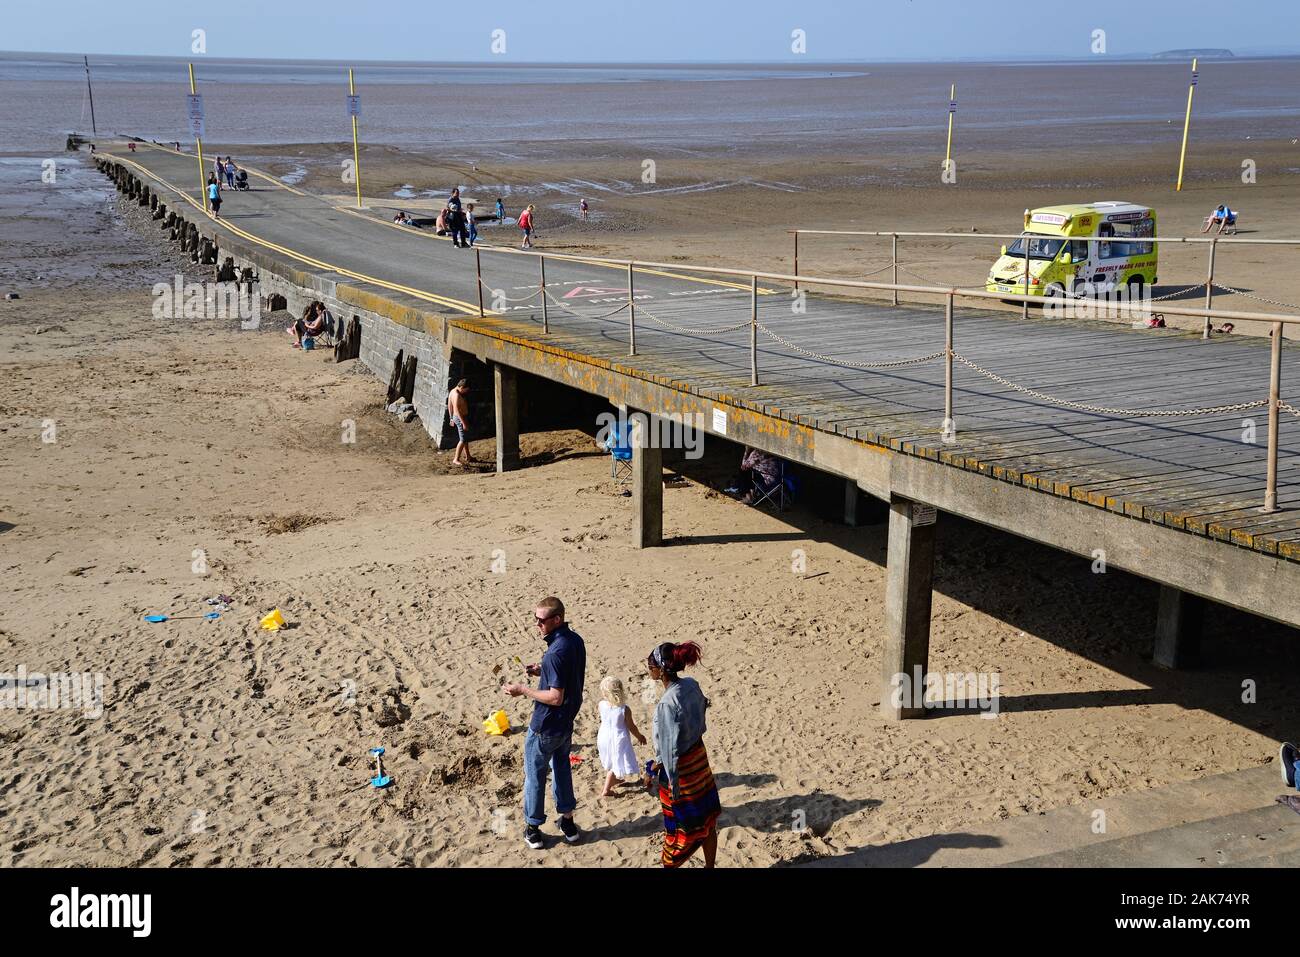 Tourists relaxing on the beach with a slipway leading to the sea, Burnham-on-Sea, England, UK. Stock Photo